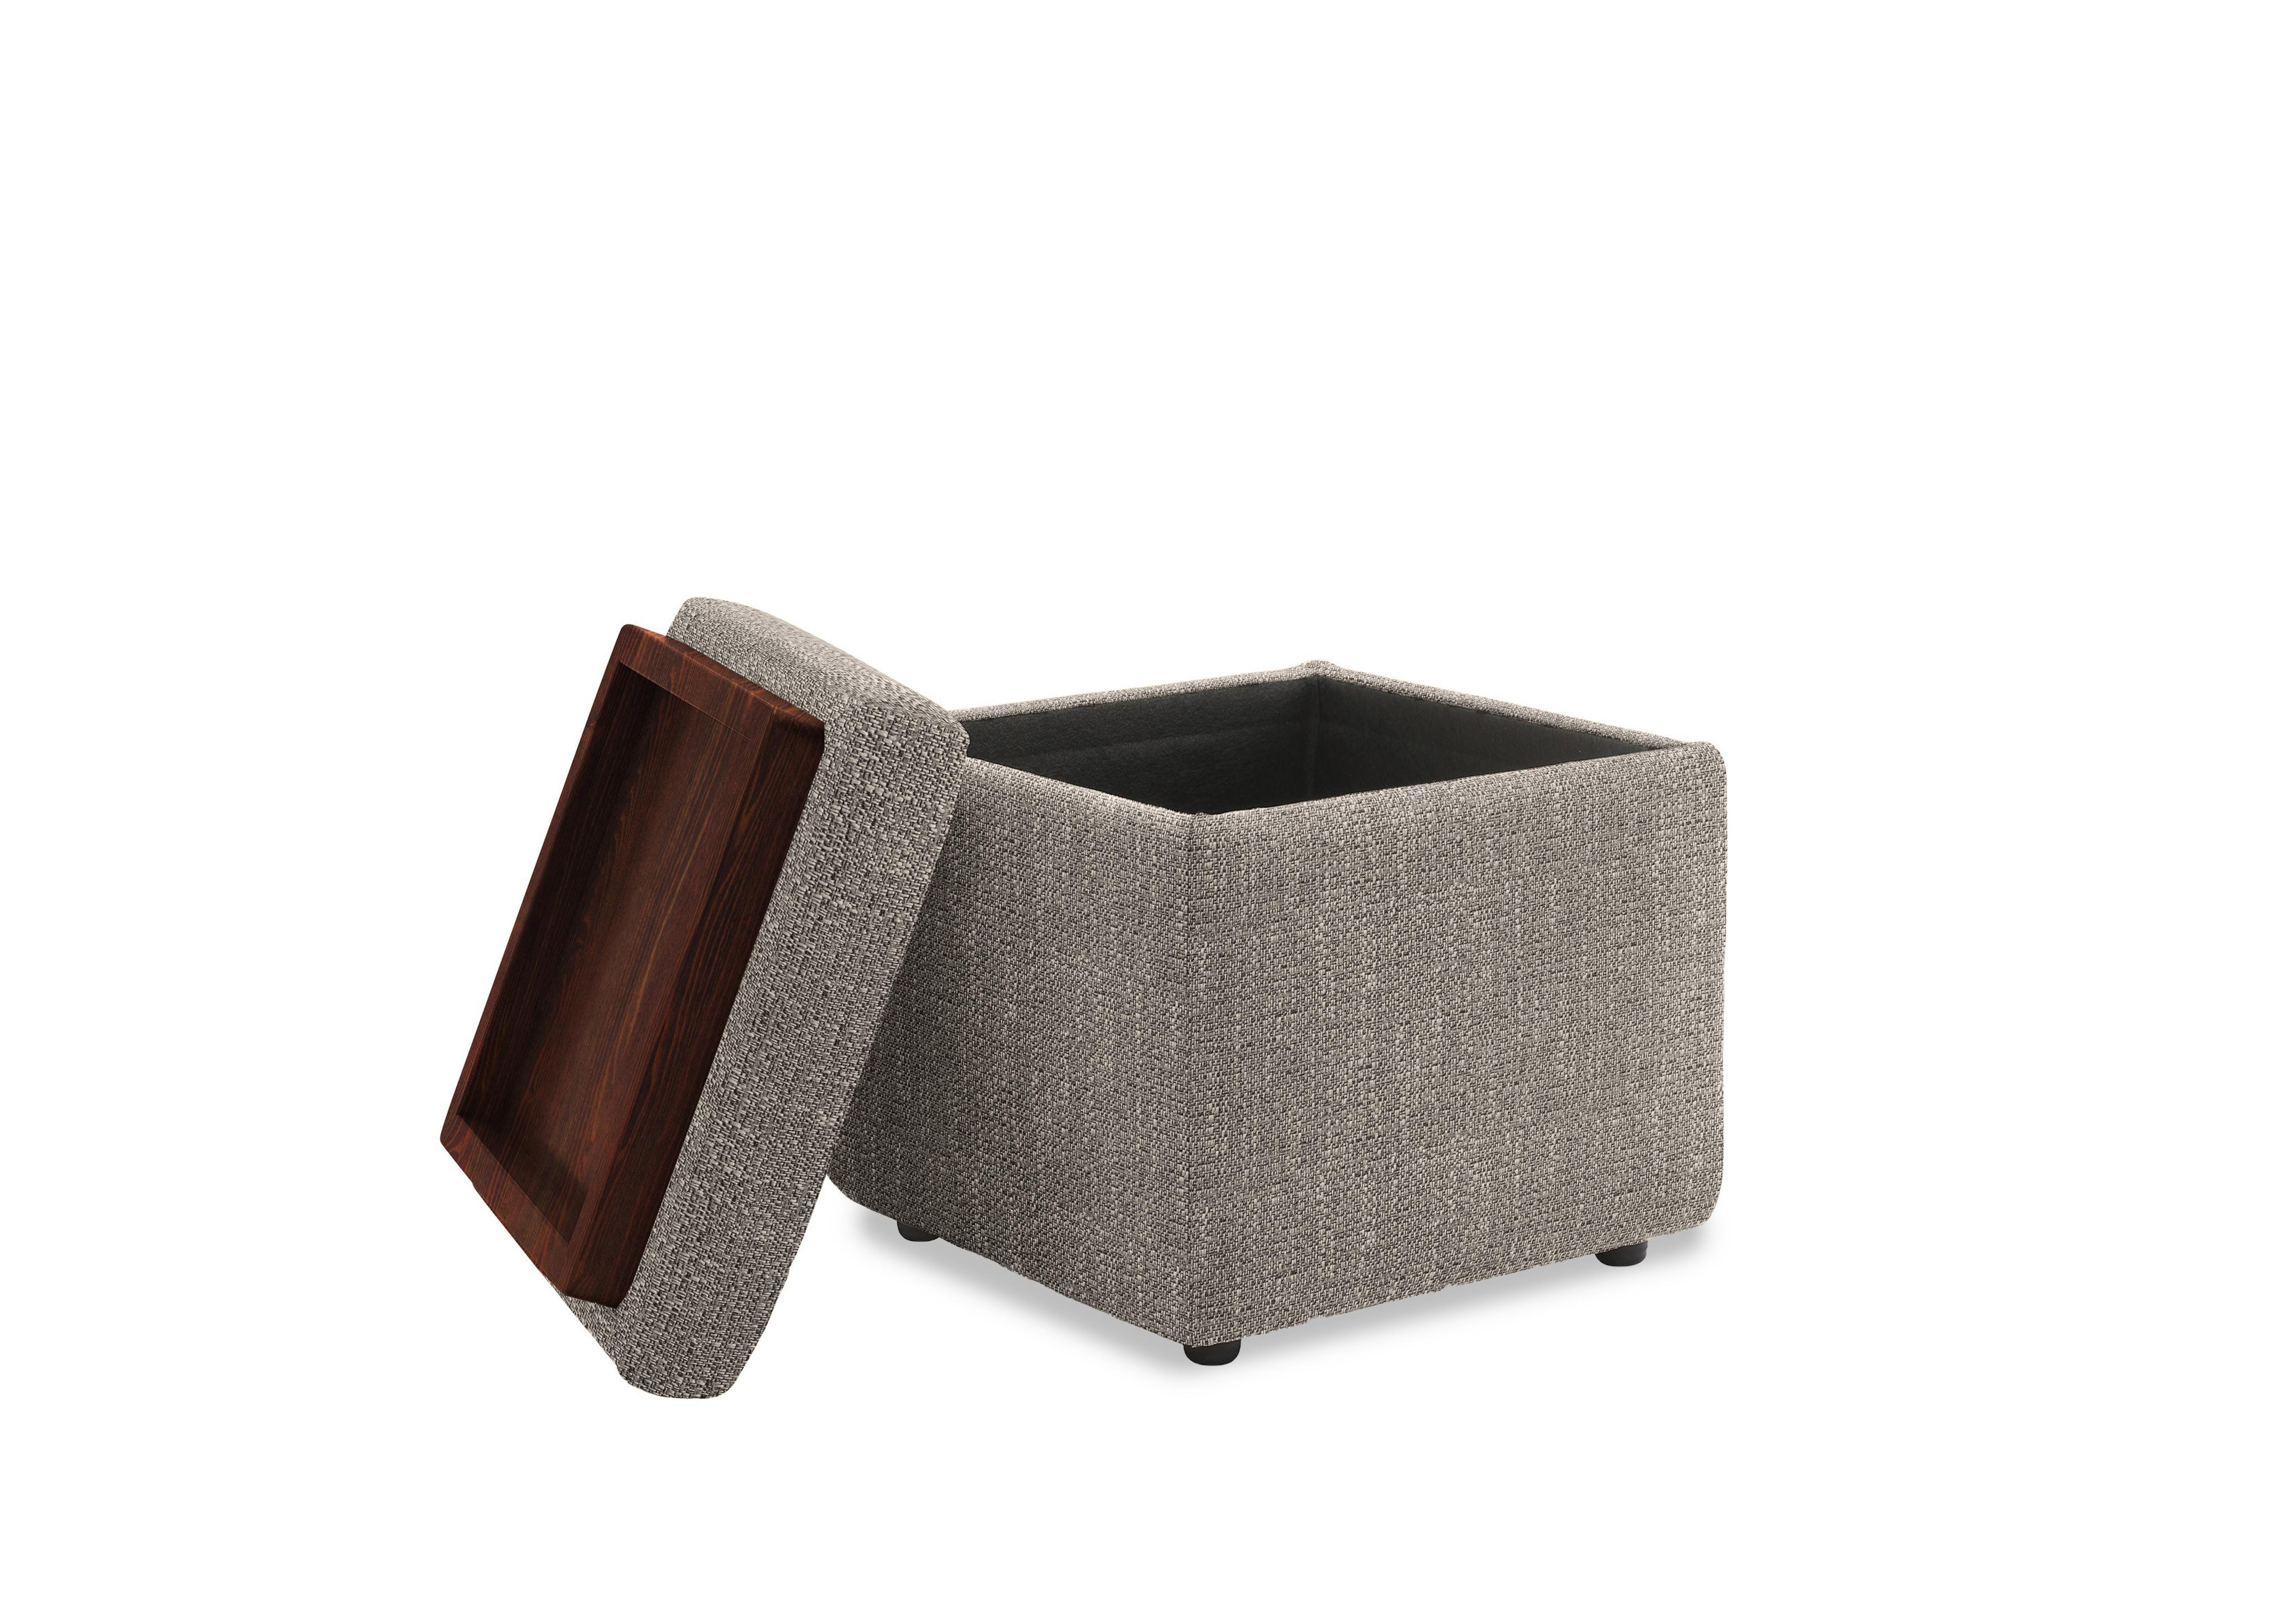 Arlo Fabric Storage Cube Tray Stool in B135 Libby Sand Wal on Furniture Village